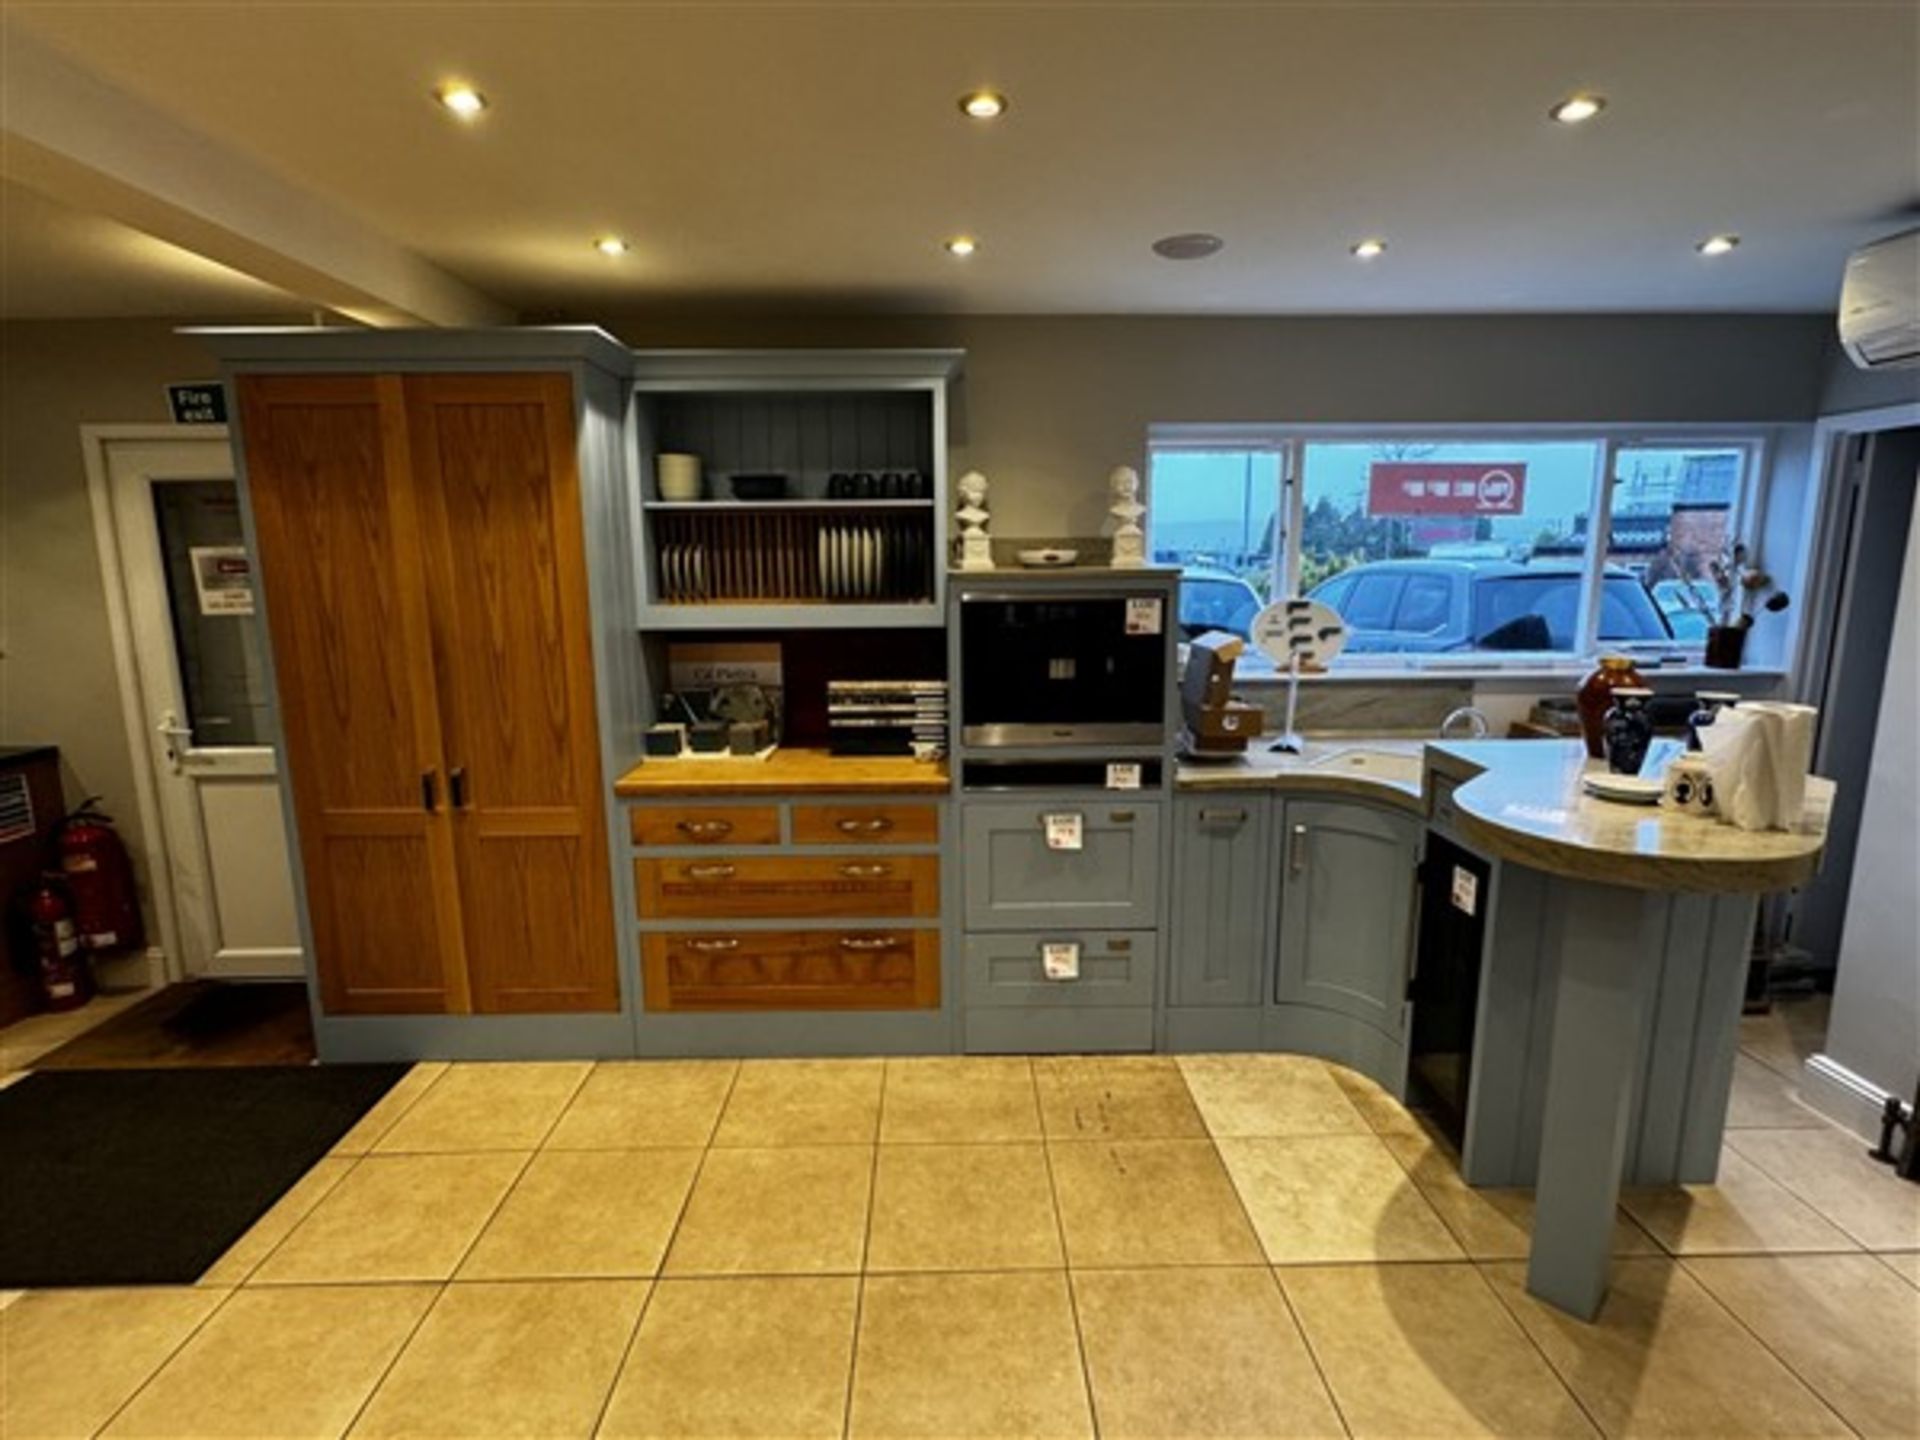 Complete ex-demo kitchen fittings comprising of 1000mm storage cupboard with drawers, 1000mm 4-